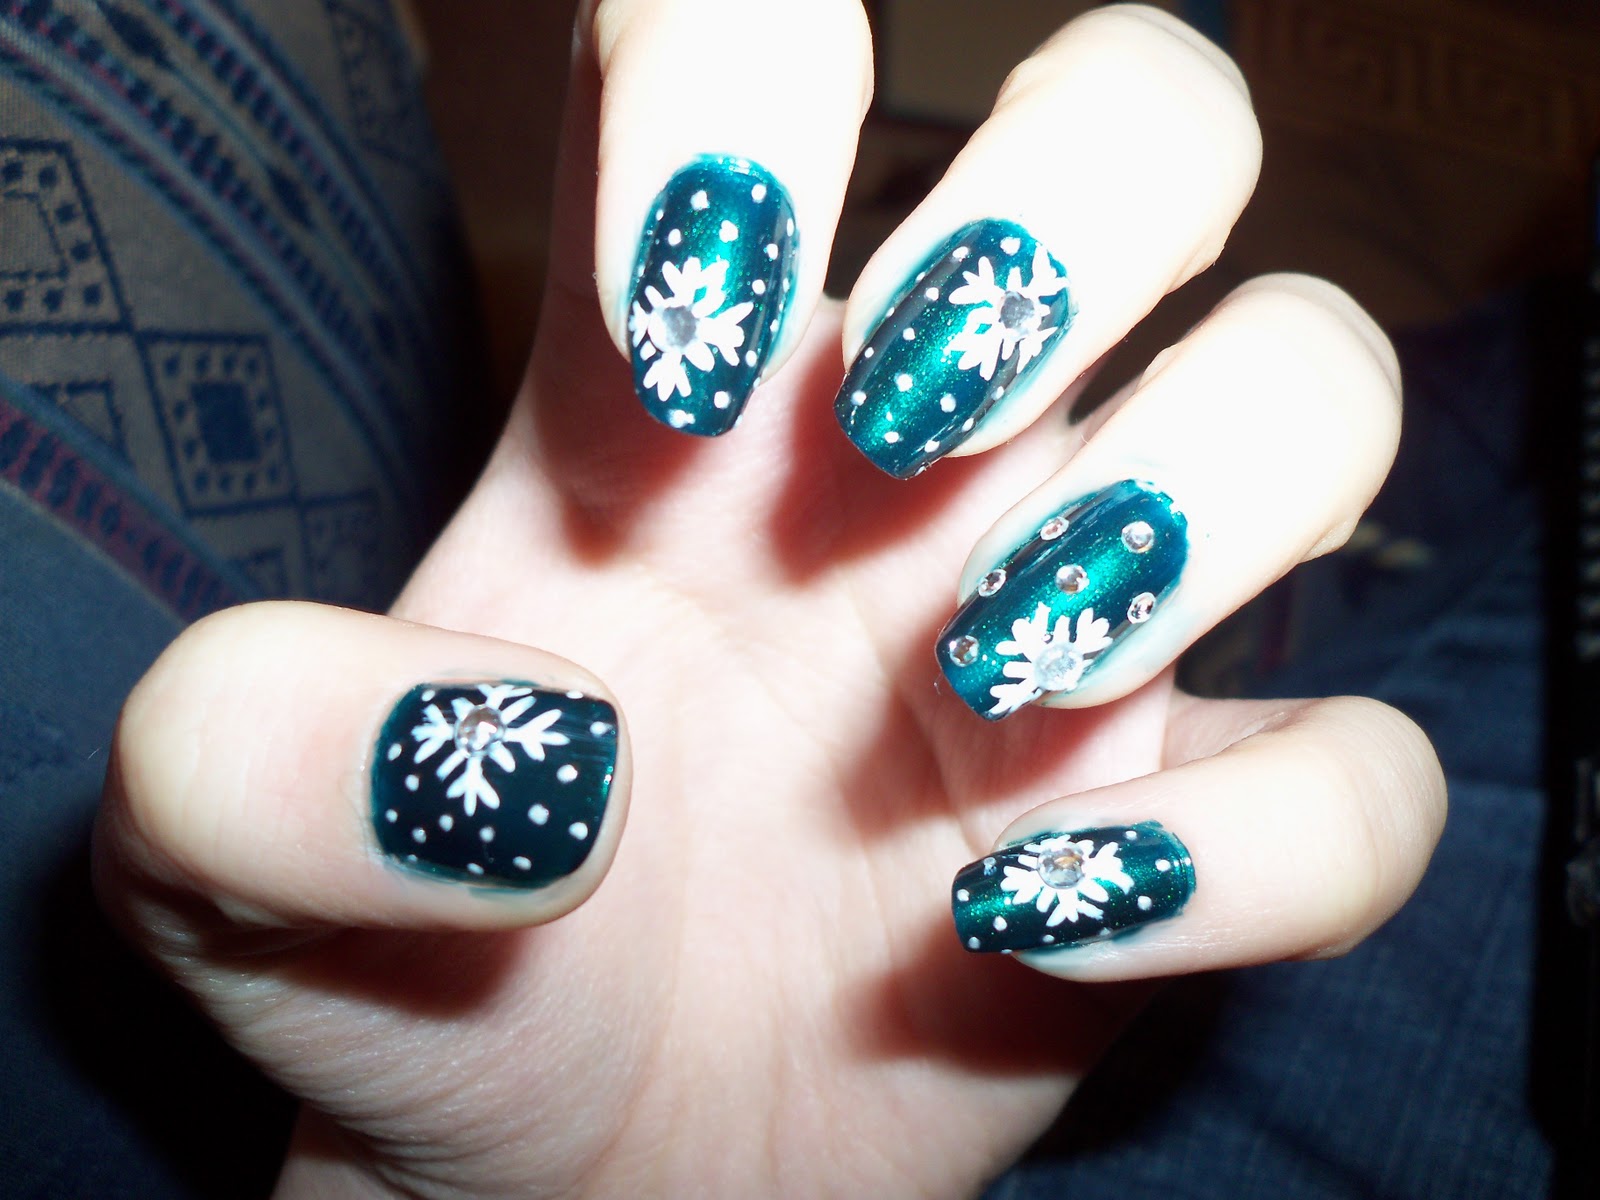 Nails in bloom Christmas Nails!